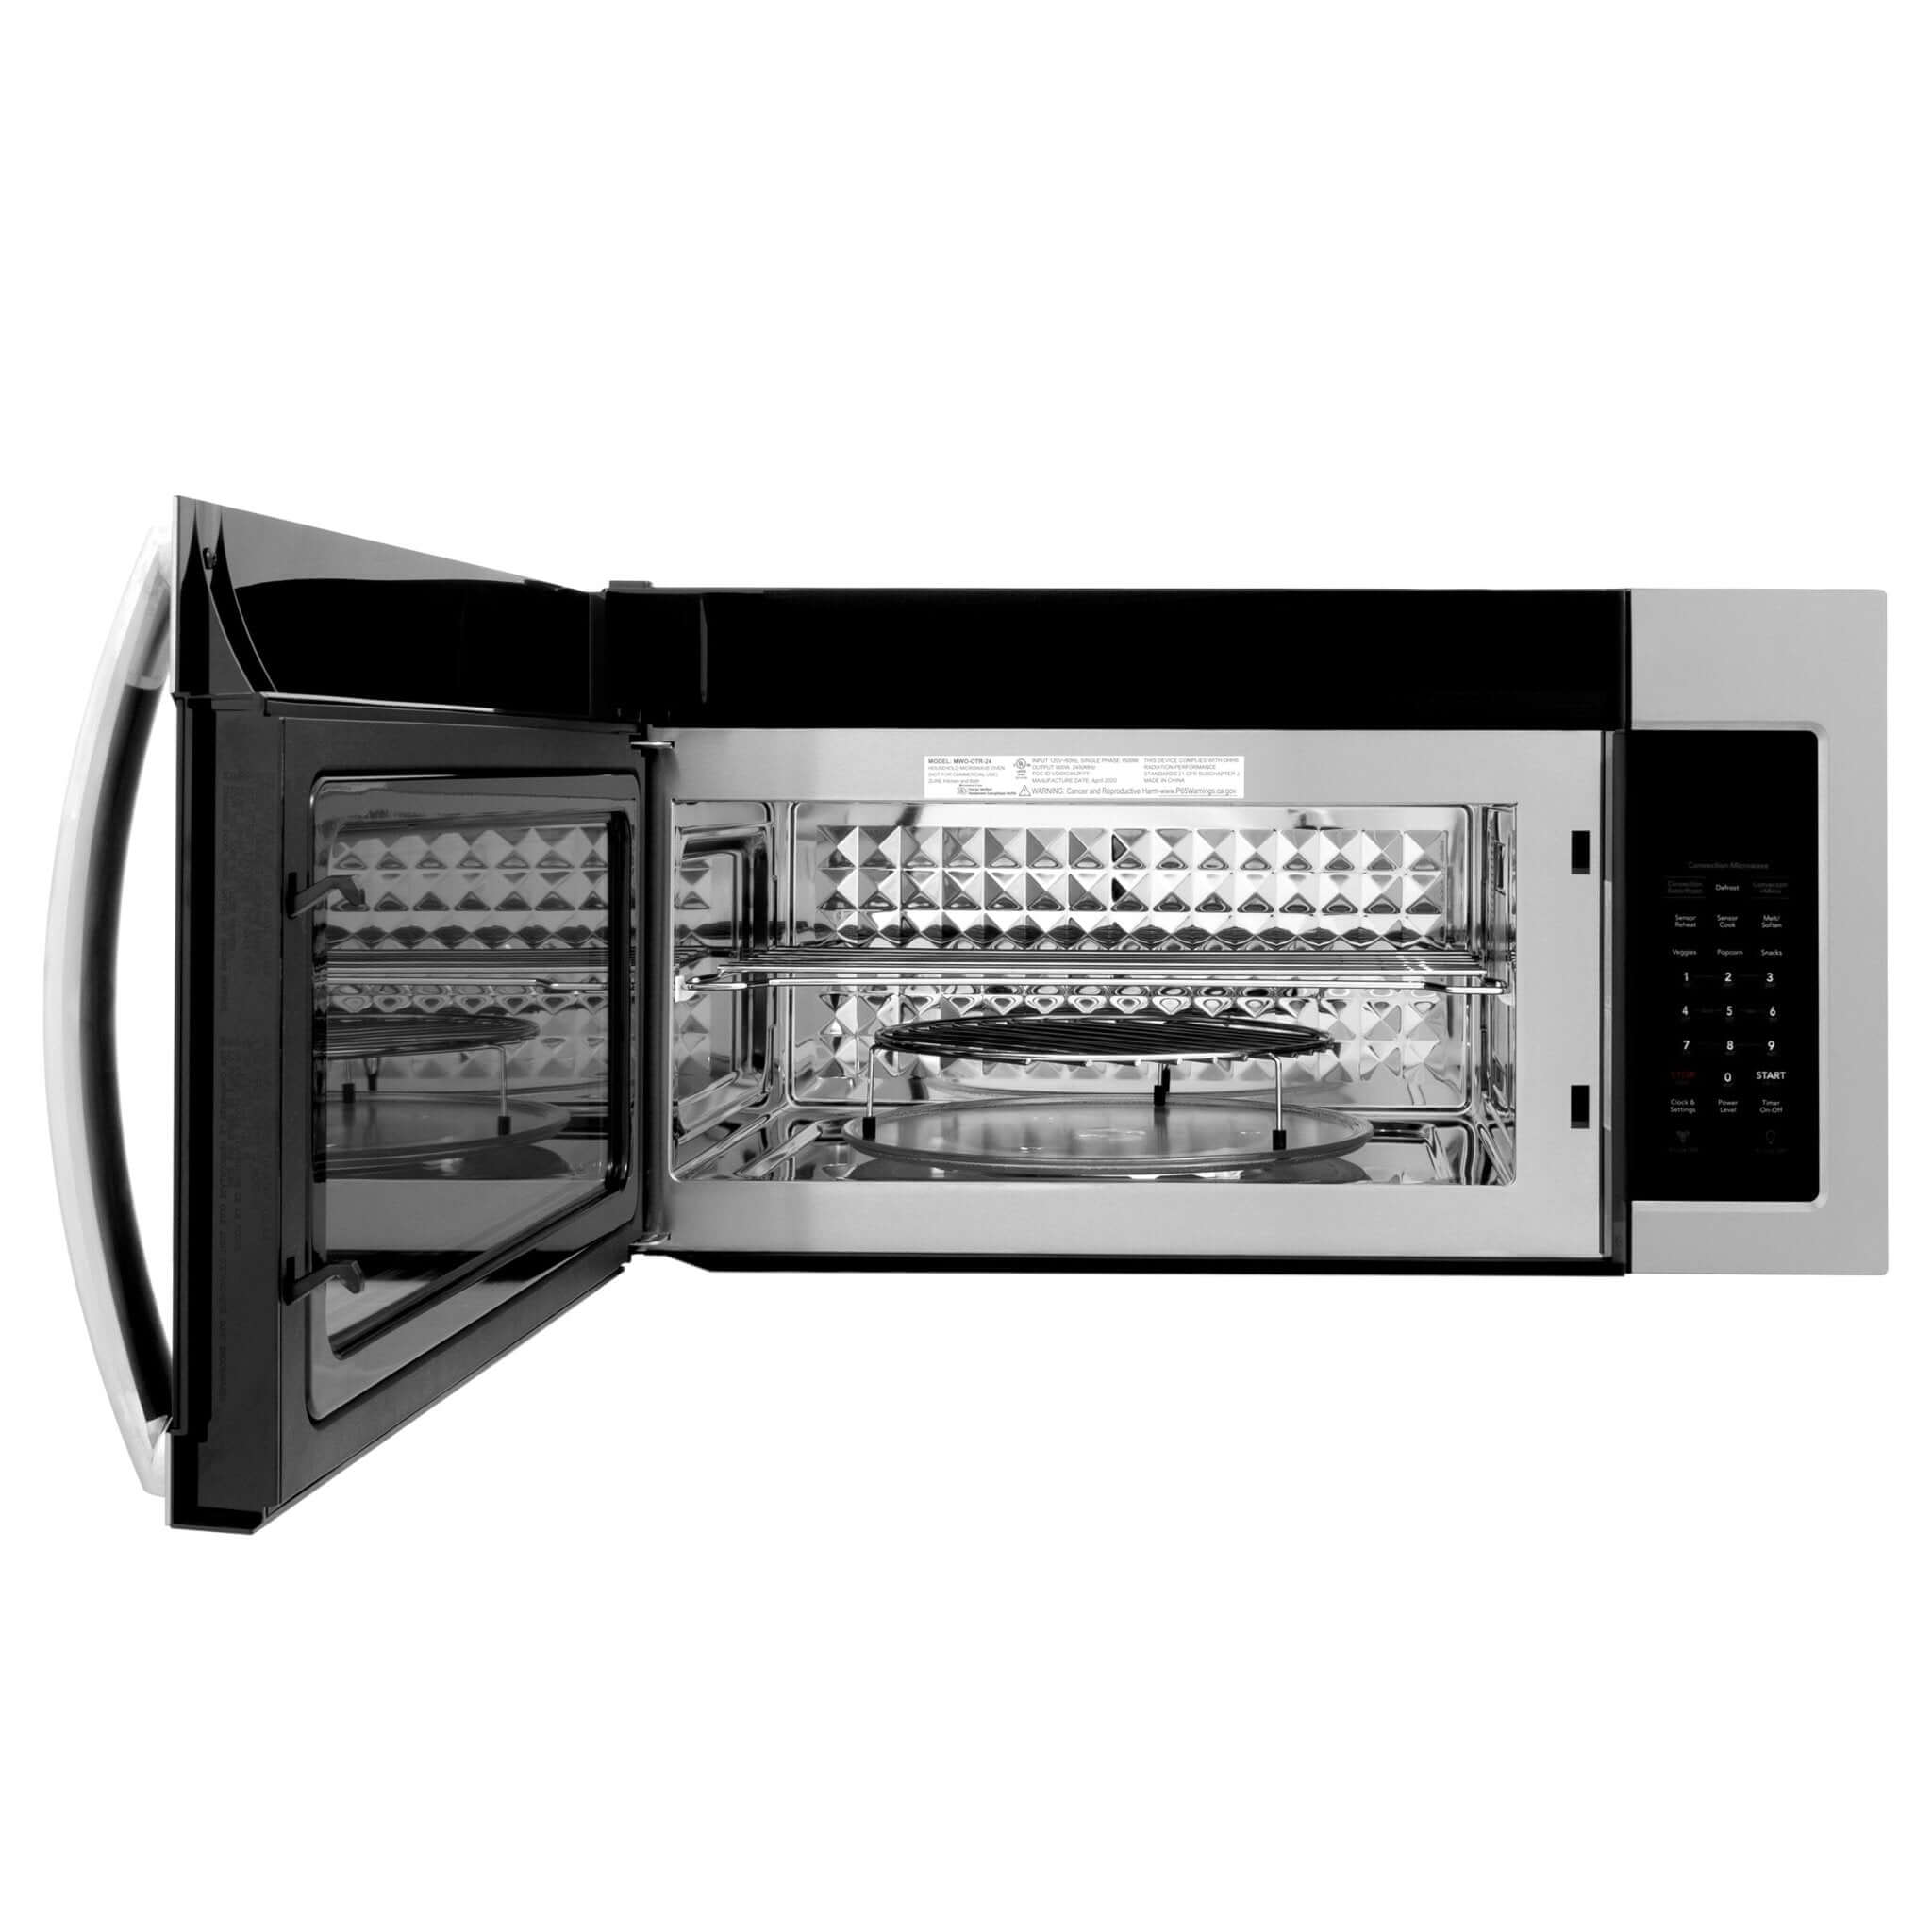 ZLINE's 30 inch over the range microwave (MWO-OTR-30) includes a Convection Rack to Achieve maximum convection performance with an included microwave rack designed to provide golden-brown results